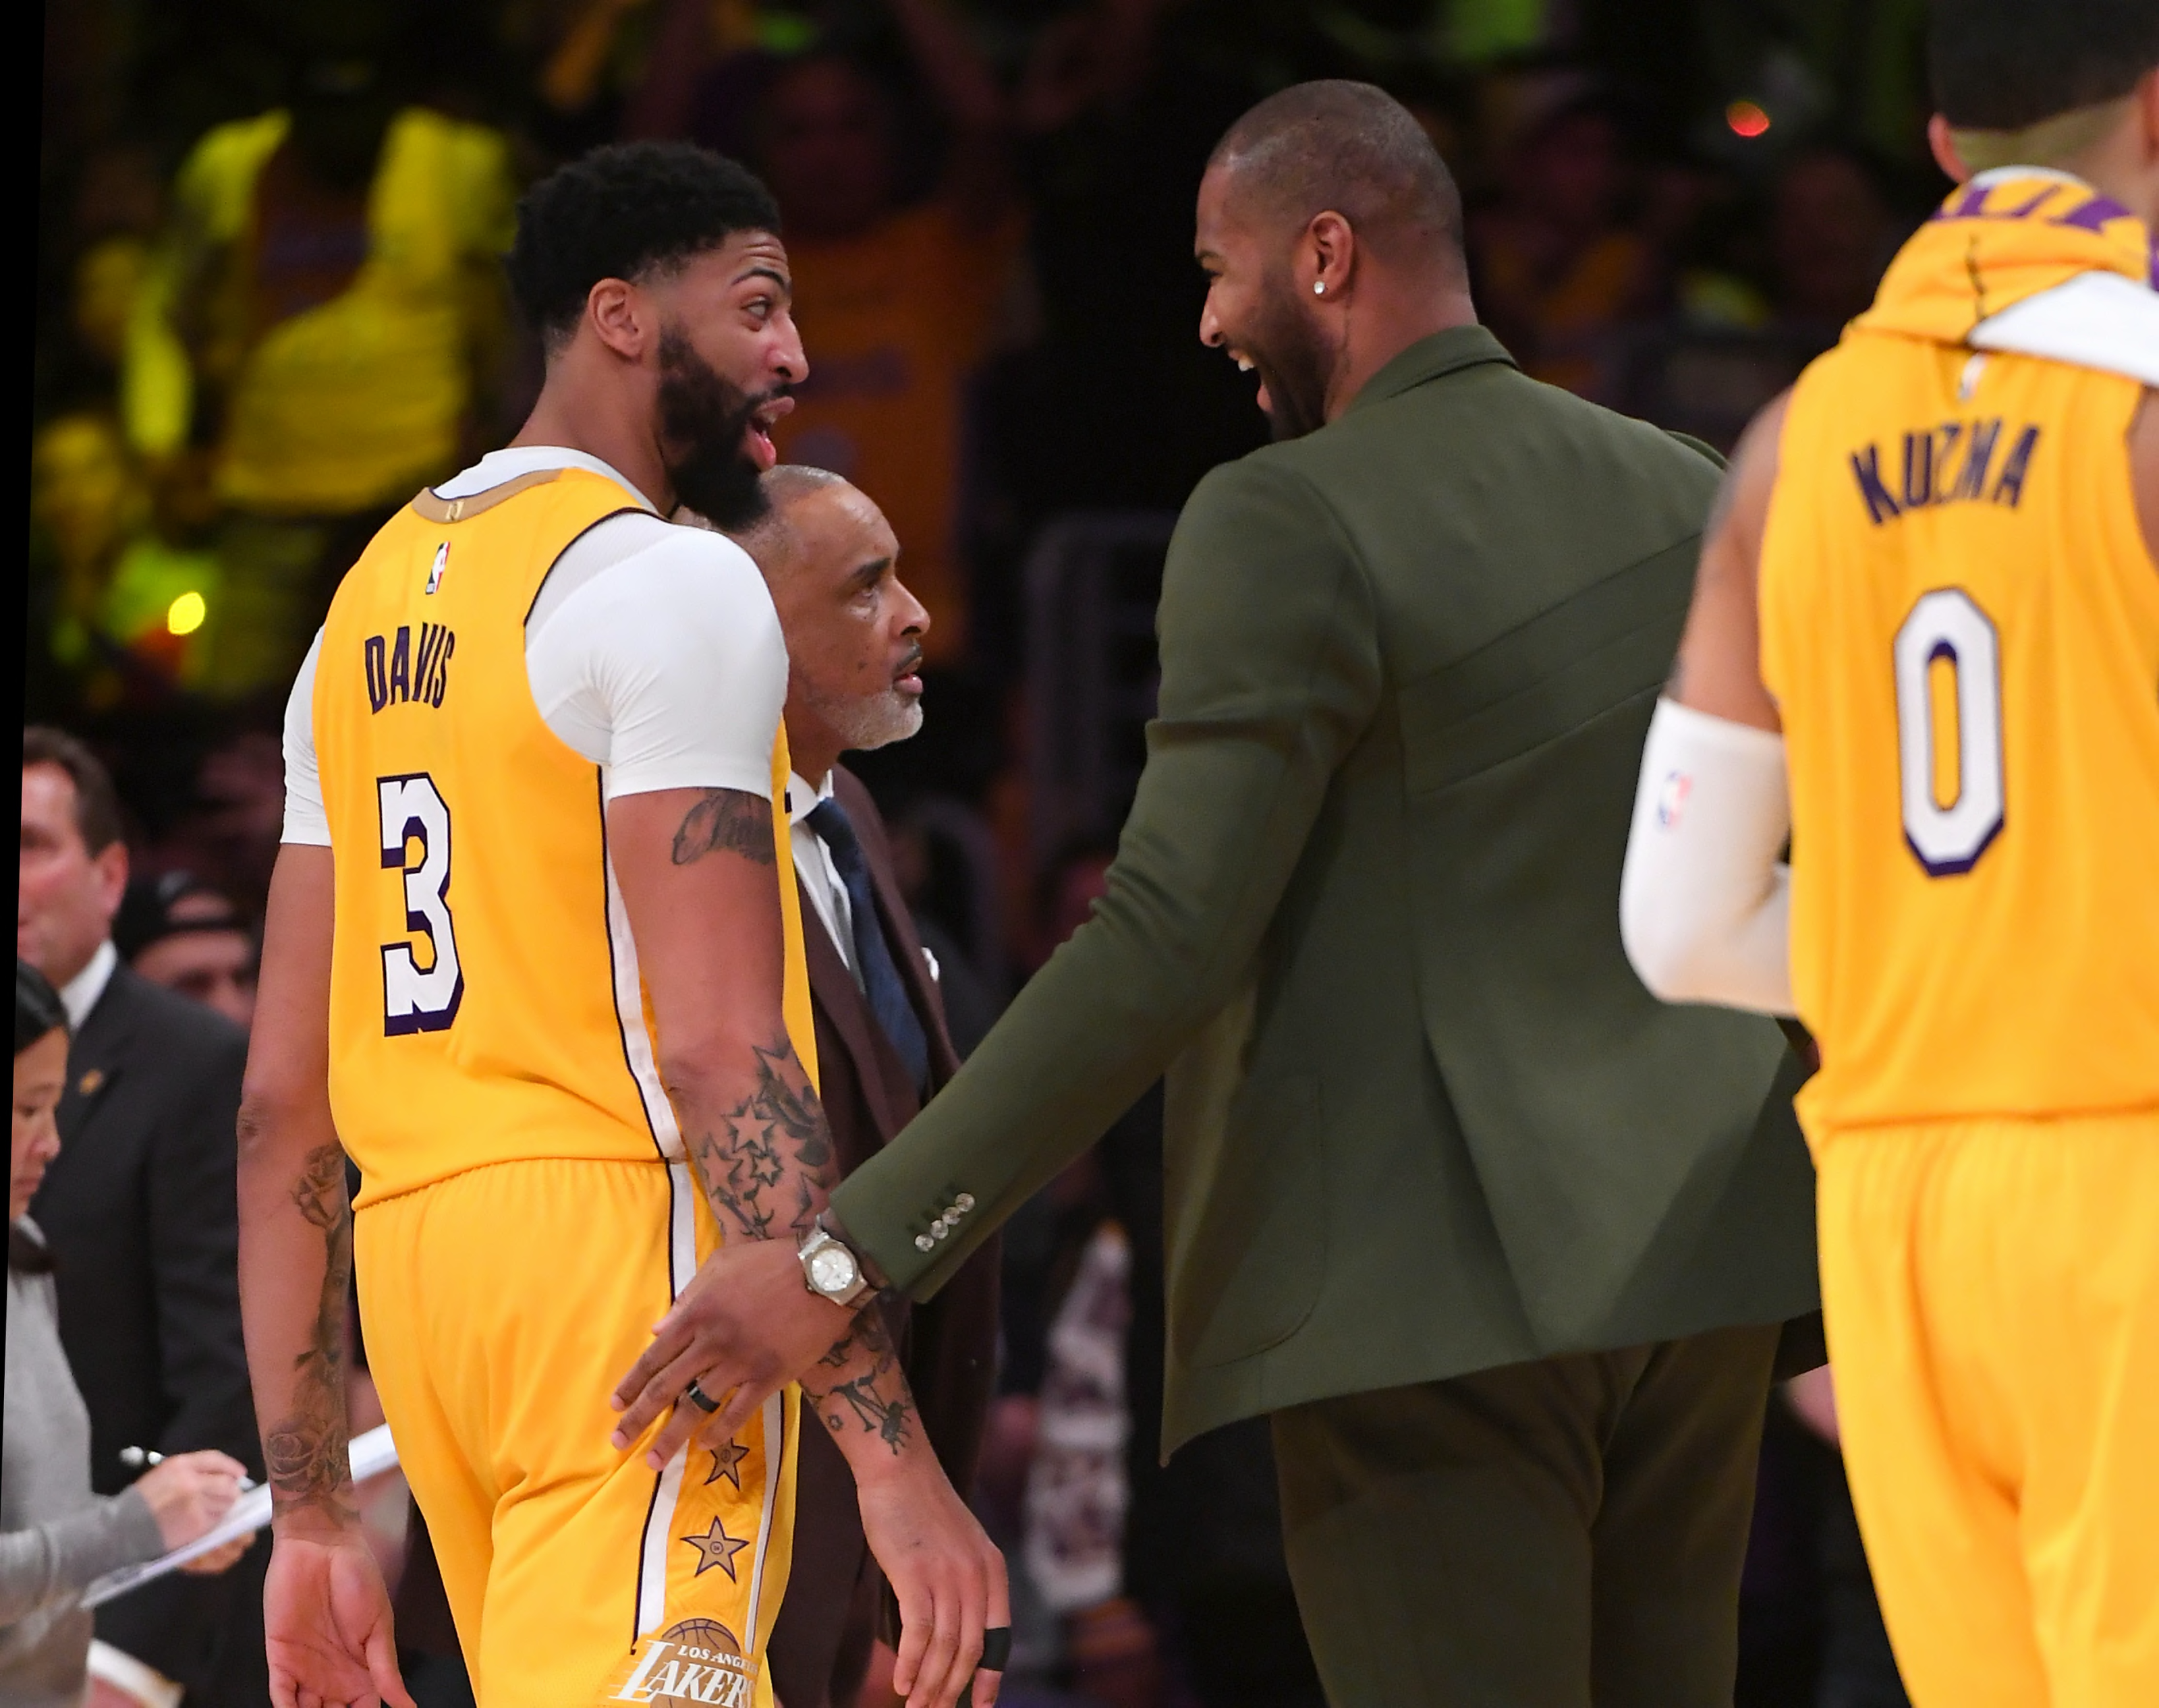 Los Angeles Lakers to waive DeMarcus Cousins, sign Markieff Morris